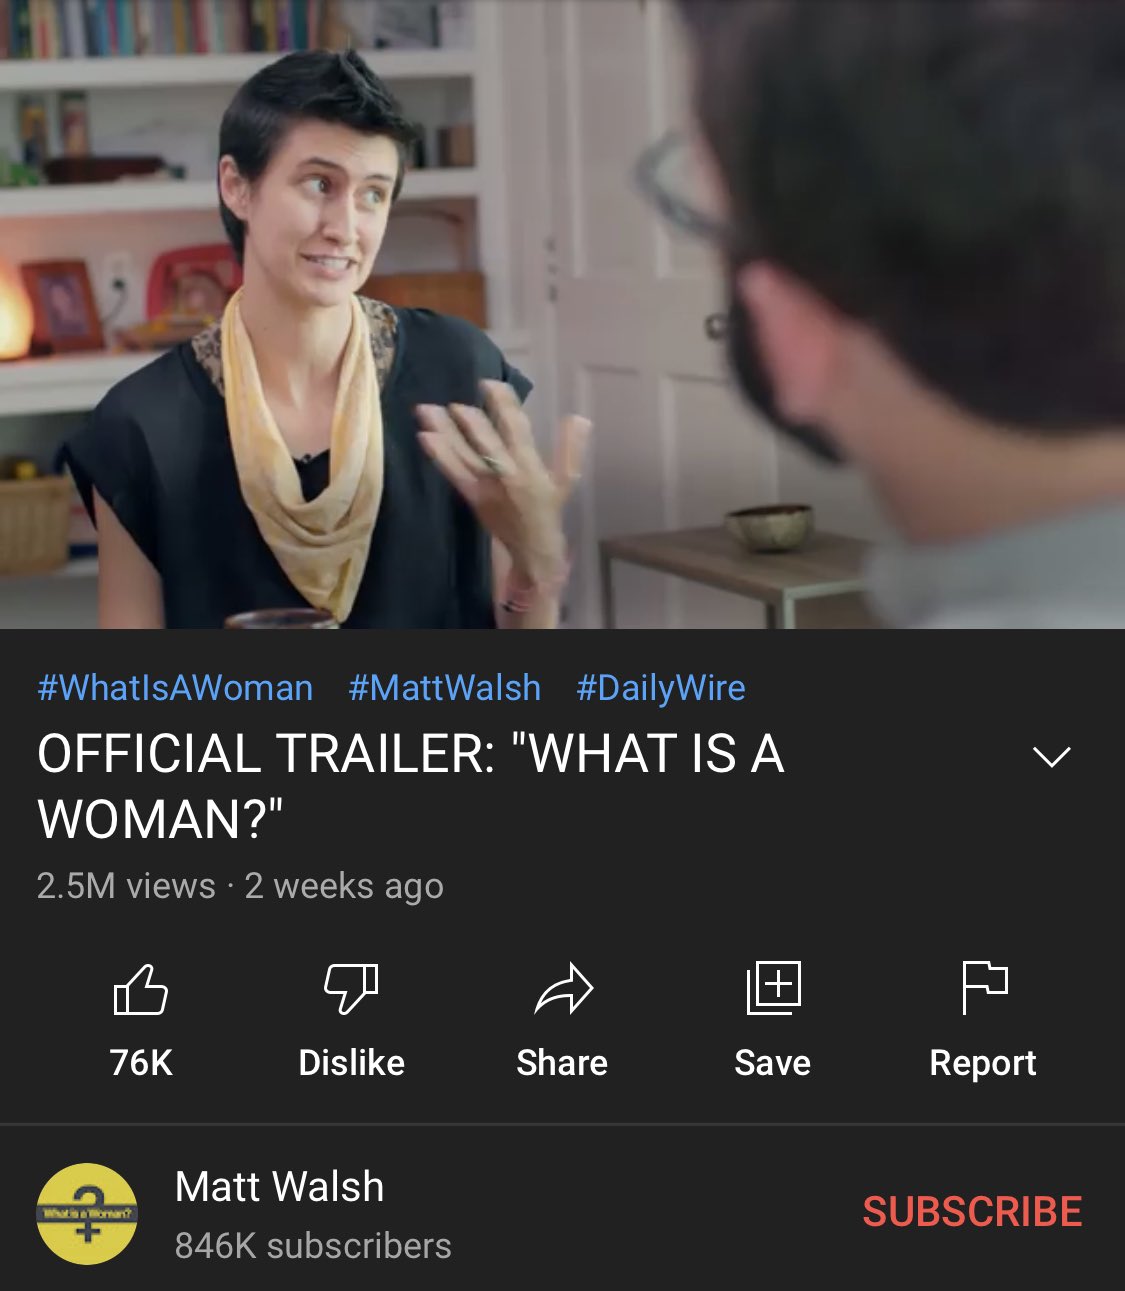 OFFICIAL TEASER: “What is a Woman?” 